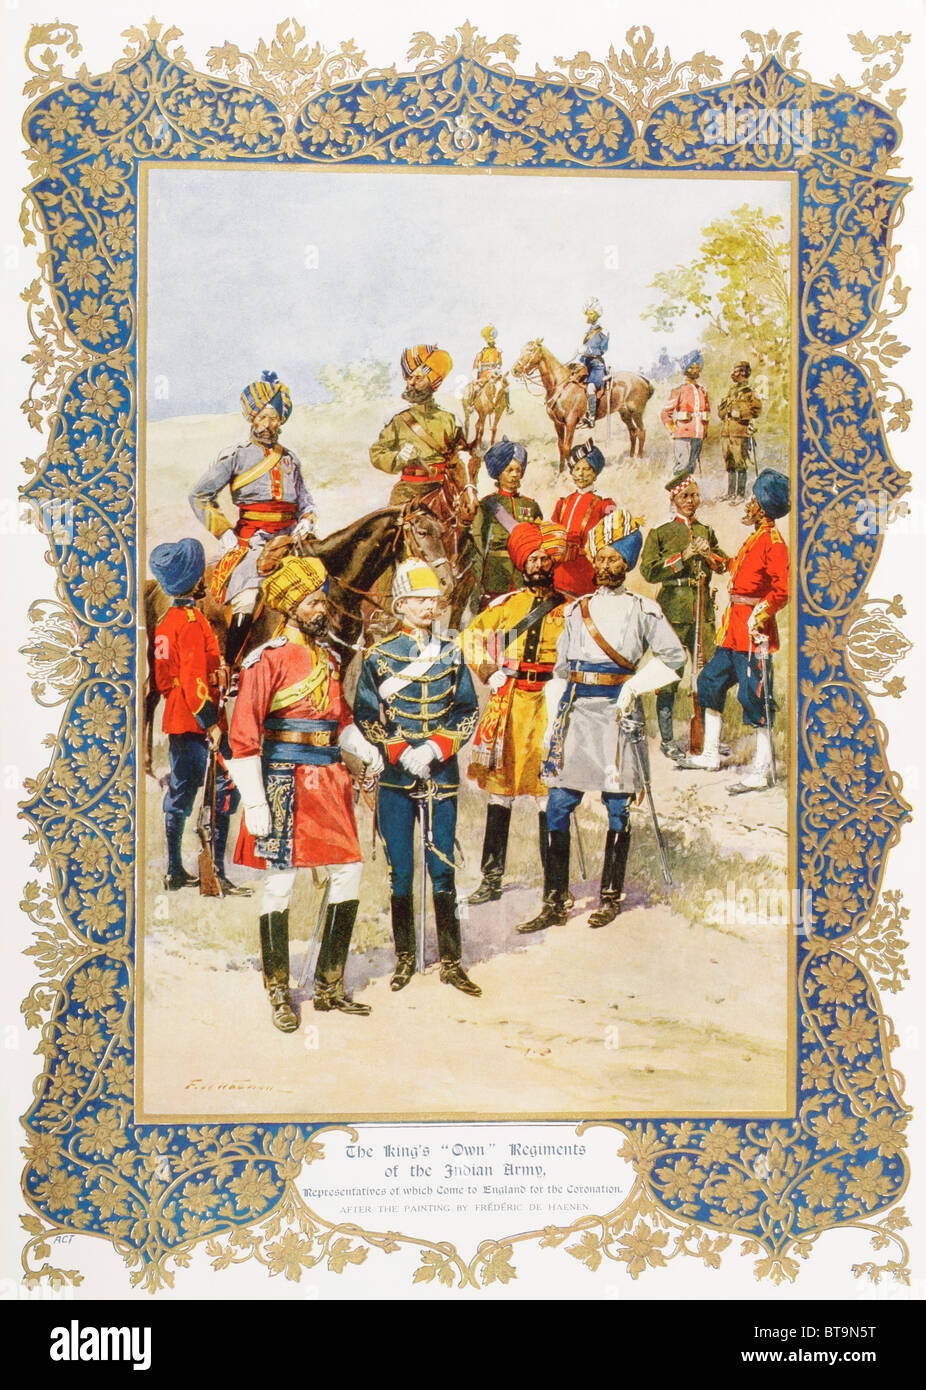 The King's Own Regiments of the Indian Army who came to the ...